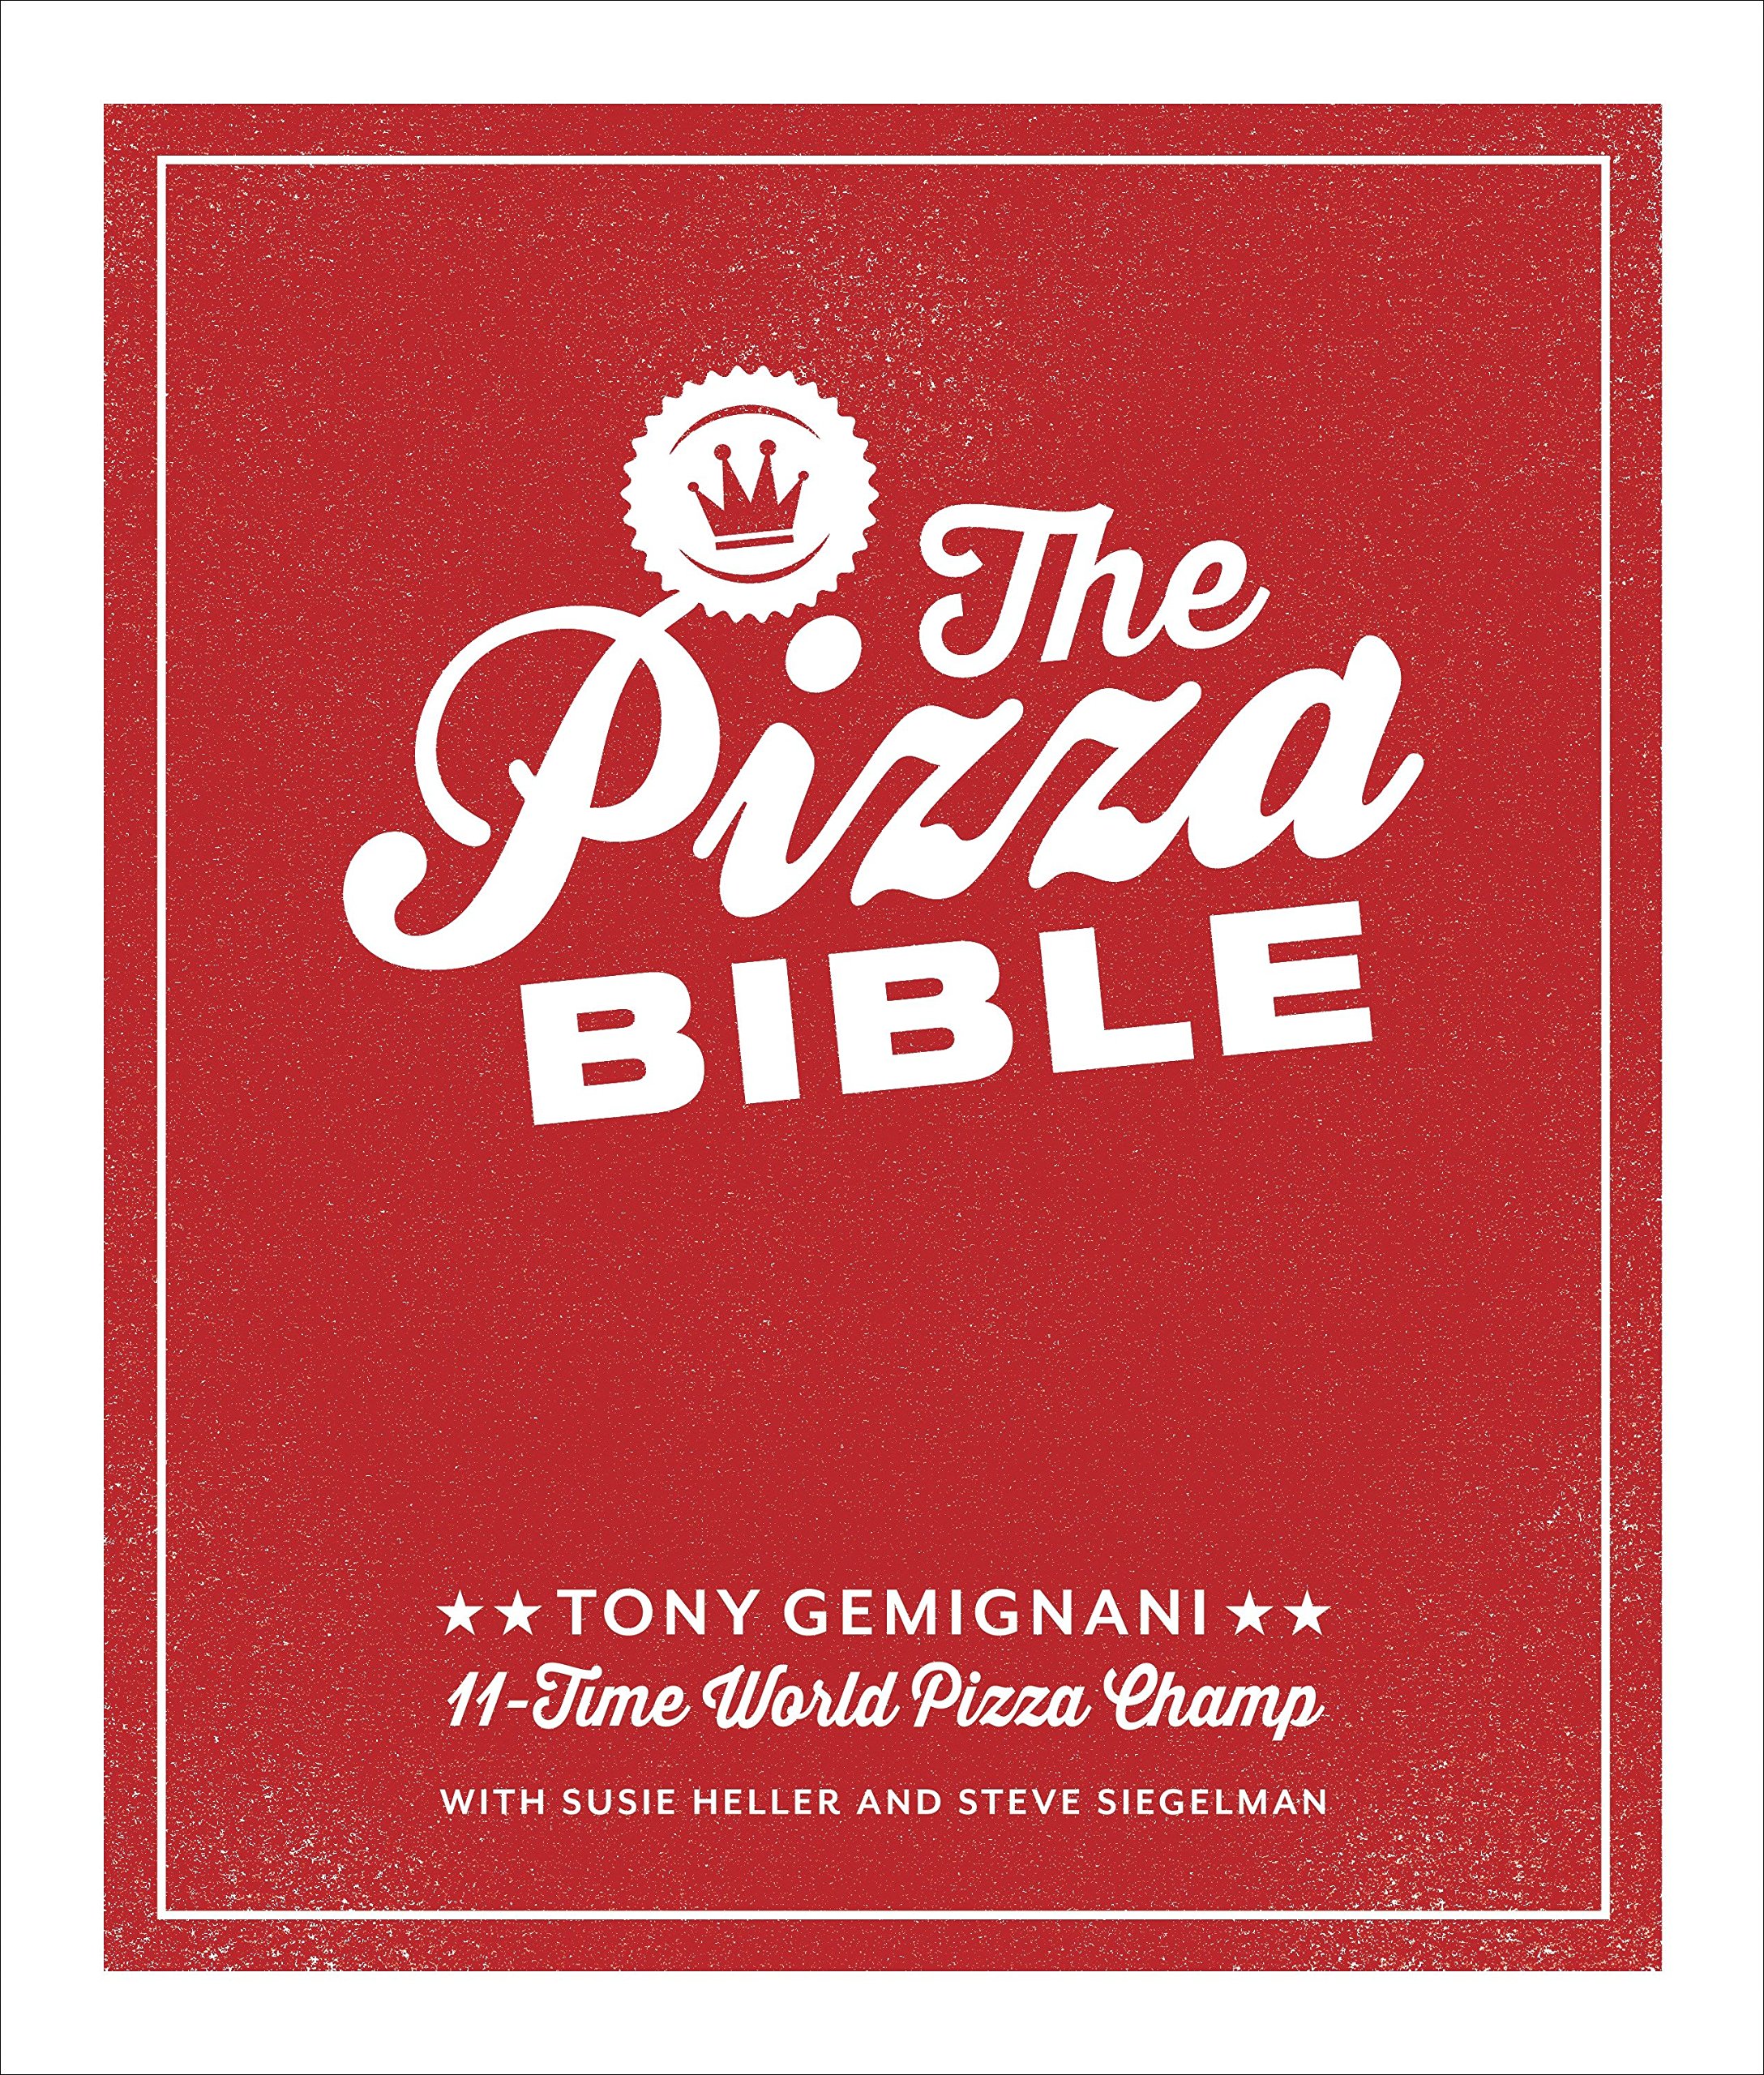 the pizza bible book to give as a gift